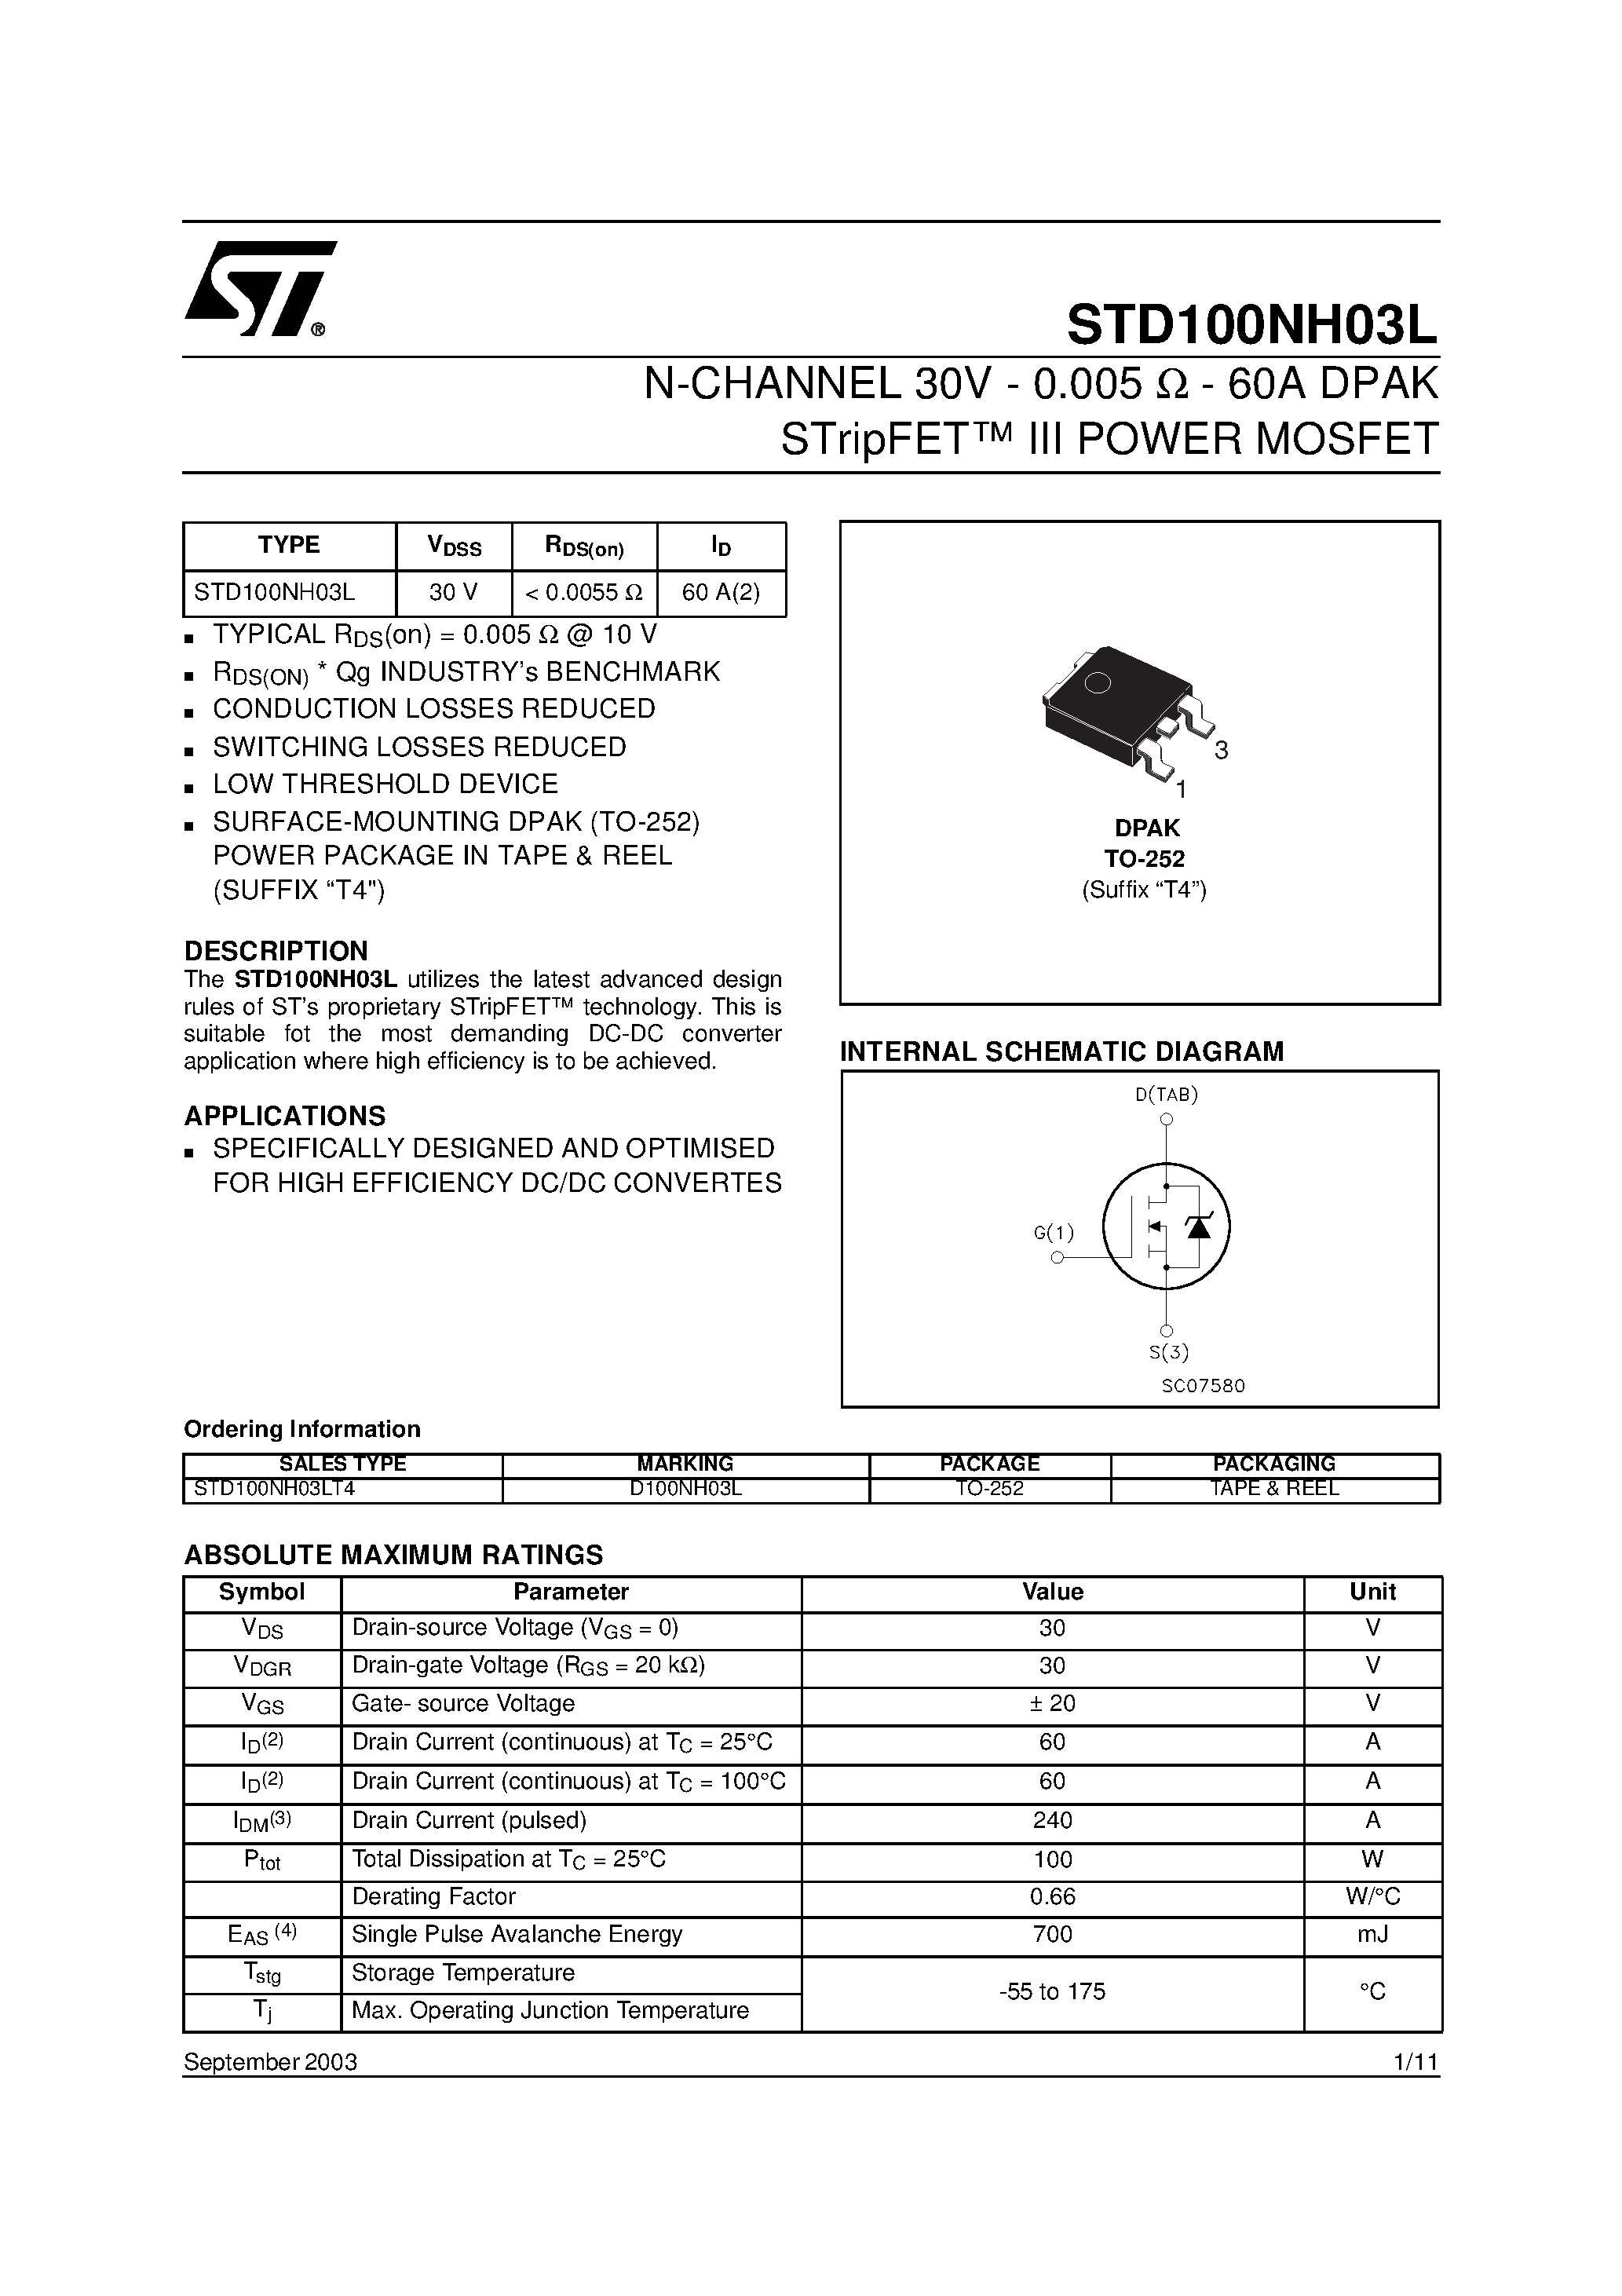 Datasheet STD100NH03L - N-CHANNEL POWER MOSFET page 1